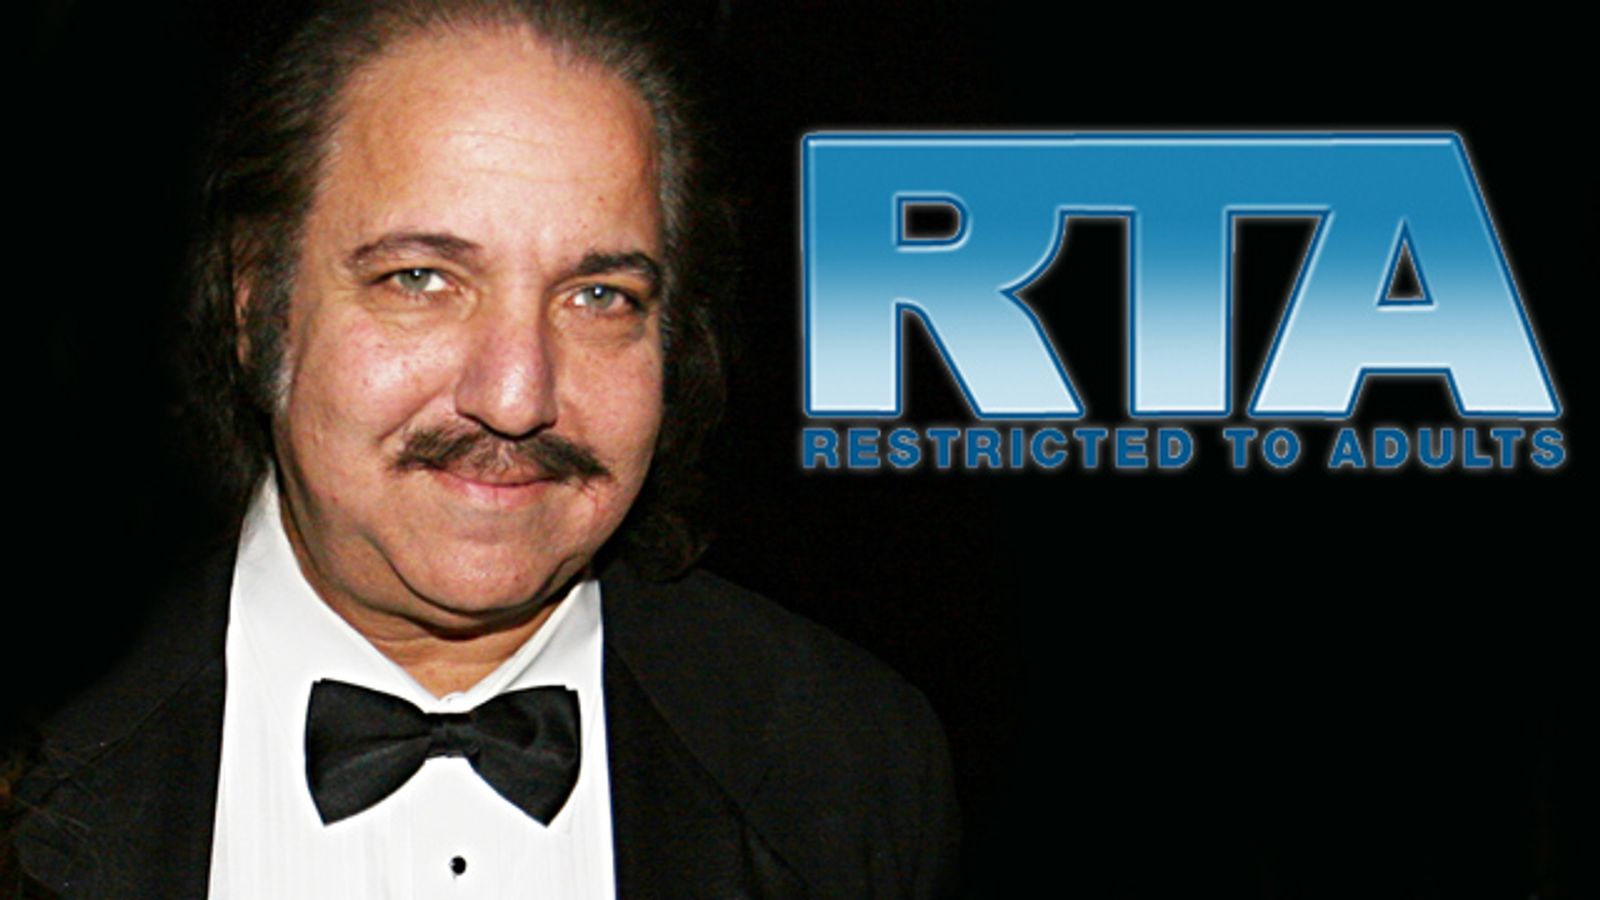 ASACP Releases RTA PSA Featuring Ron Jeremy for Internet Safety Month